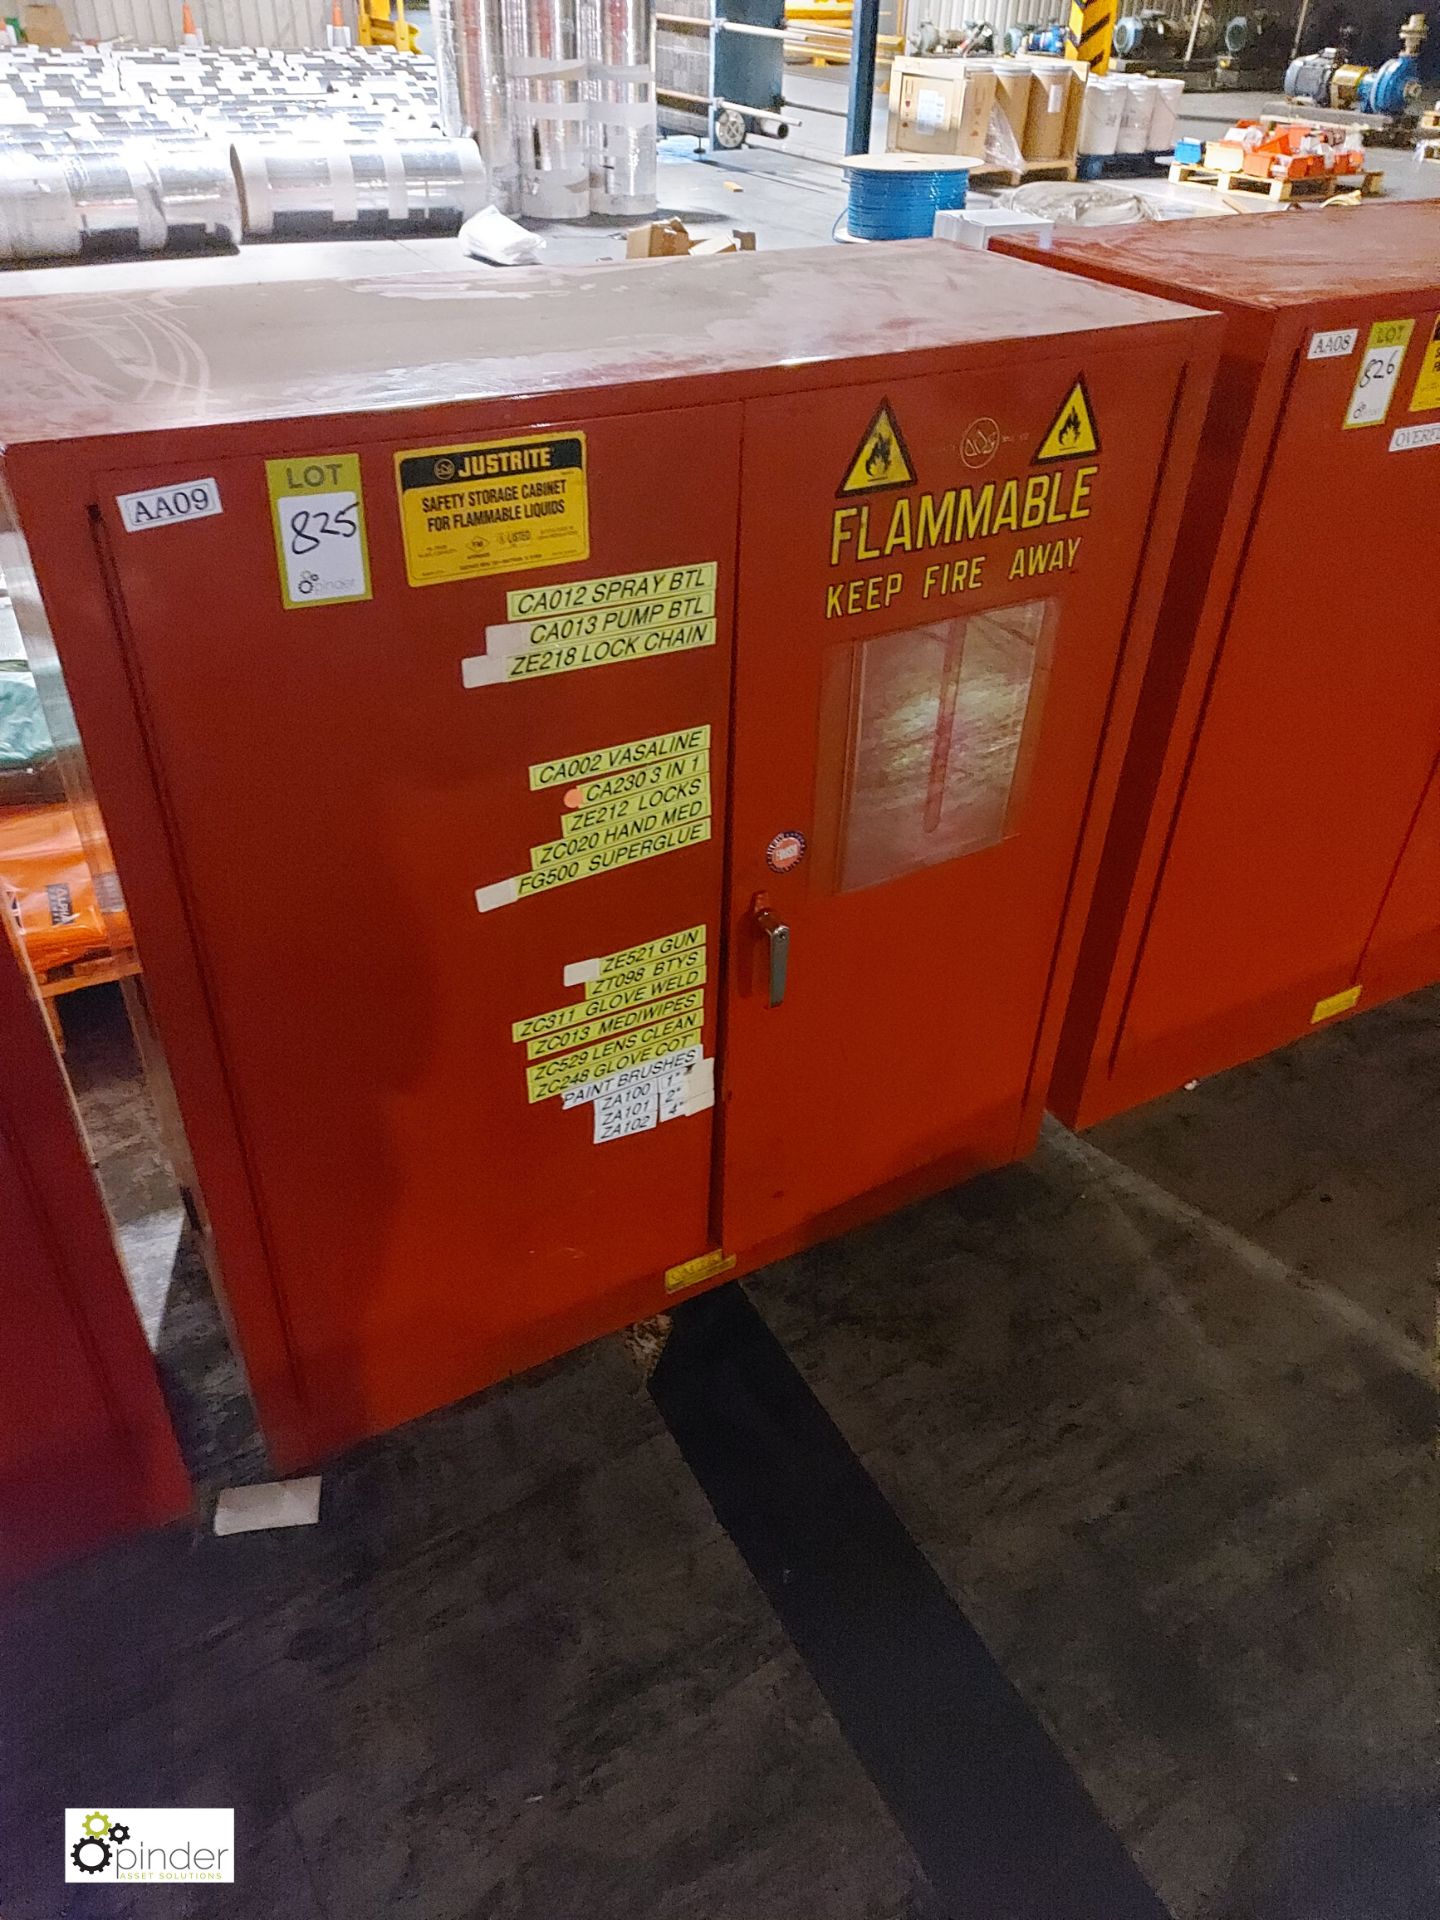 Justrite 25400 Safety Storage Cabinet, for flammable liquids, 40 gallon capacity (please note